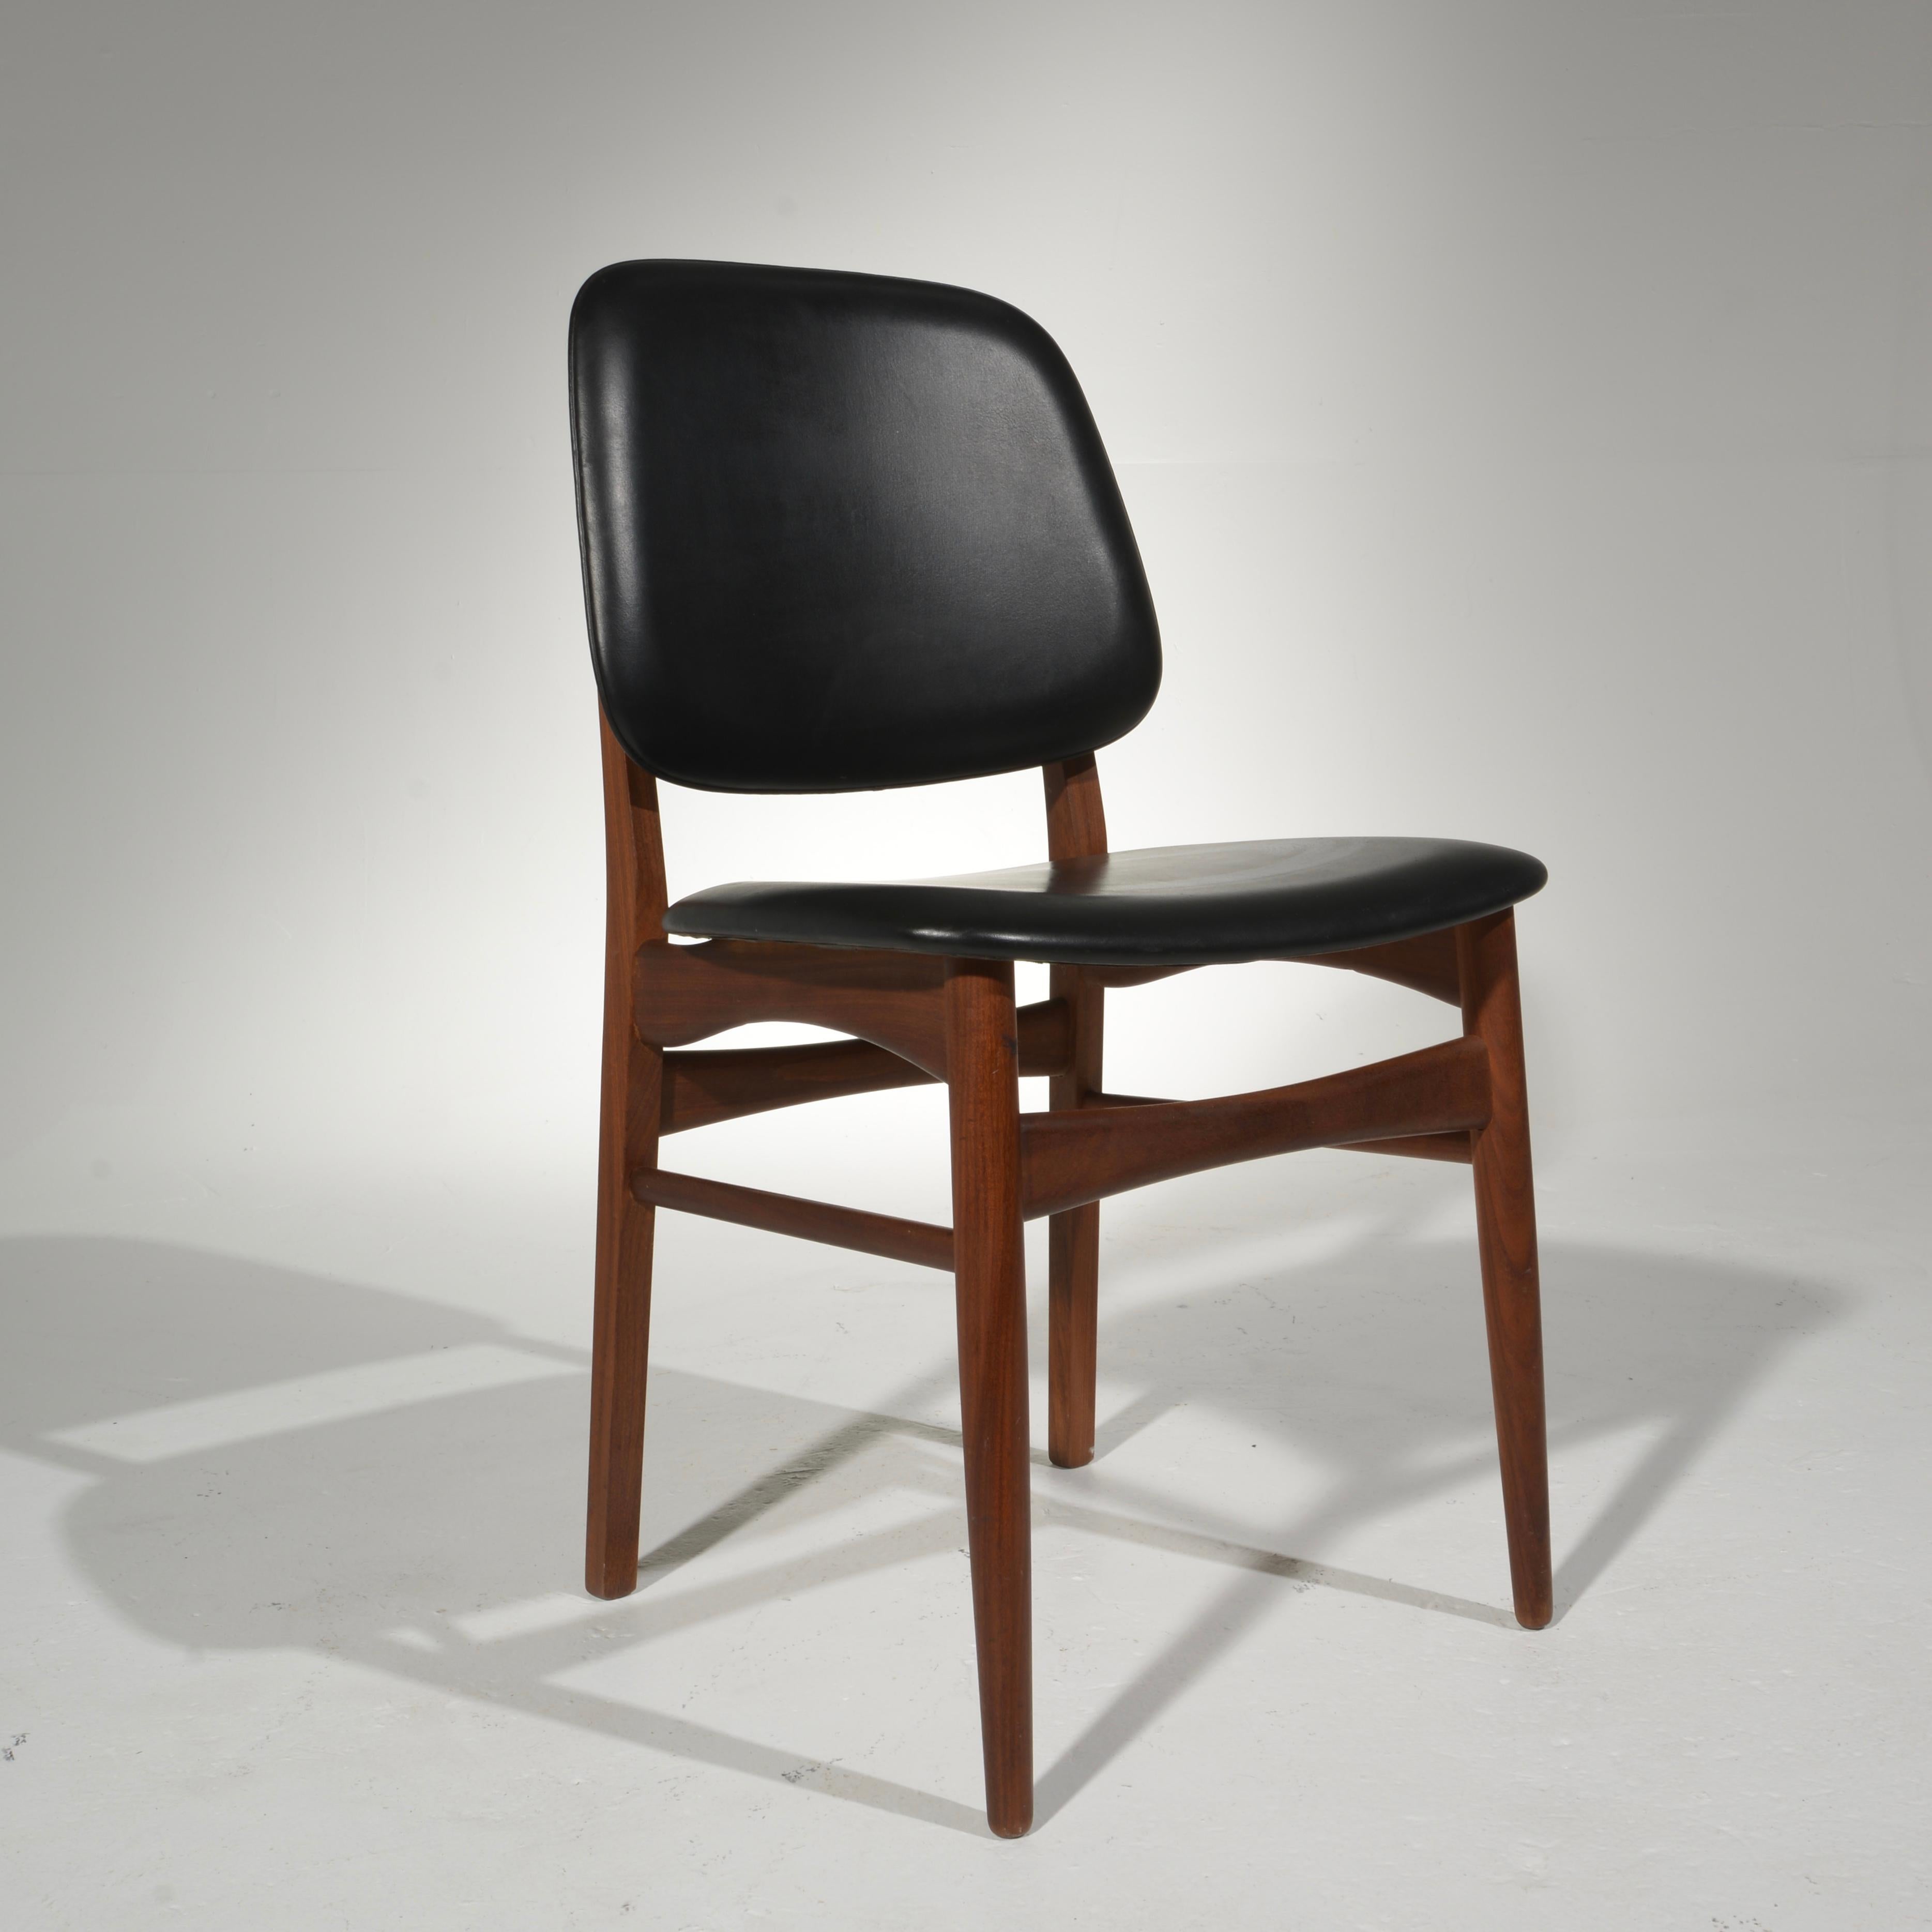 This is an excellent set of 6 danish modern dining chairs in the style of Arne Vodder and Arne Hovmand-Olsen.  All 6 are in excellent and ready to use condition.  Made from solid teak.